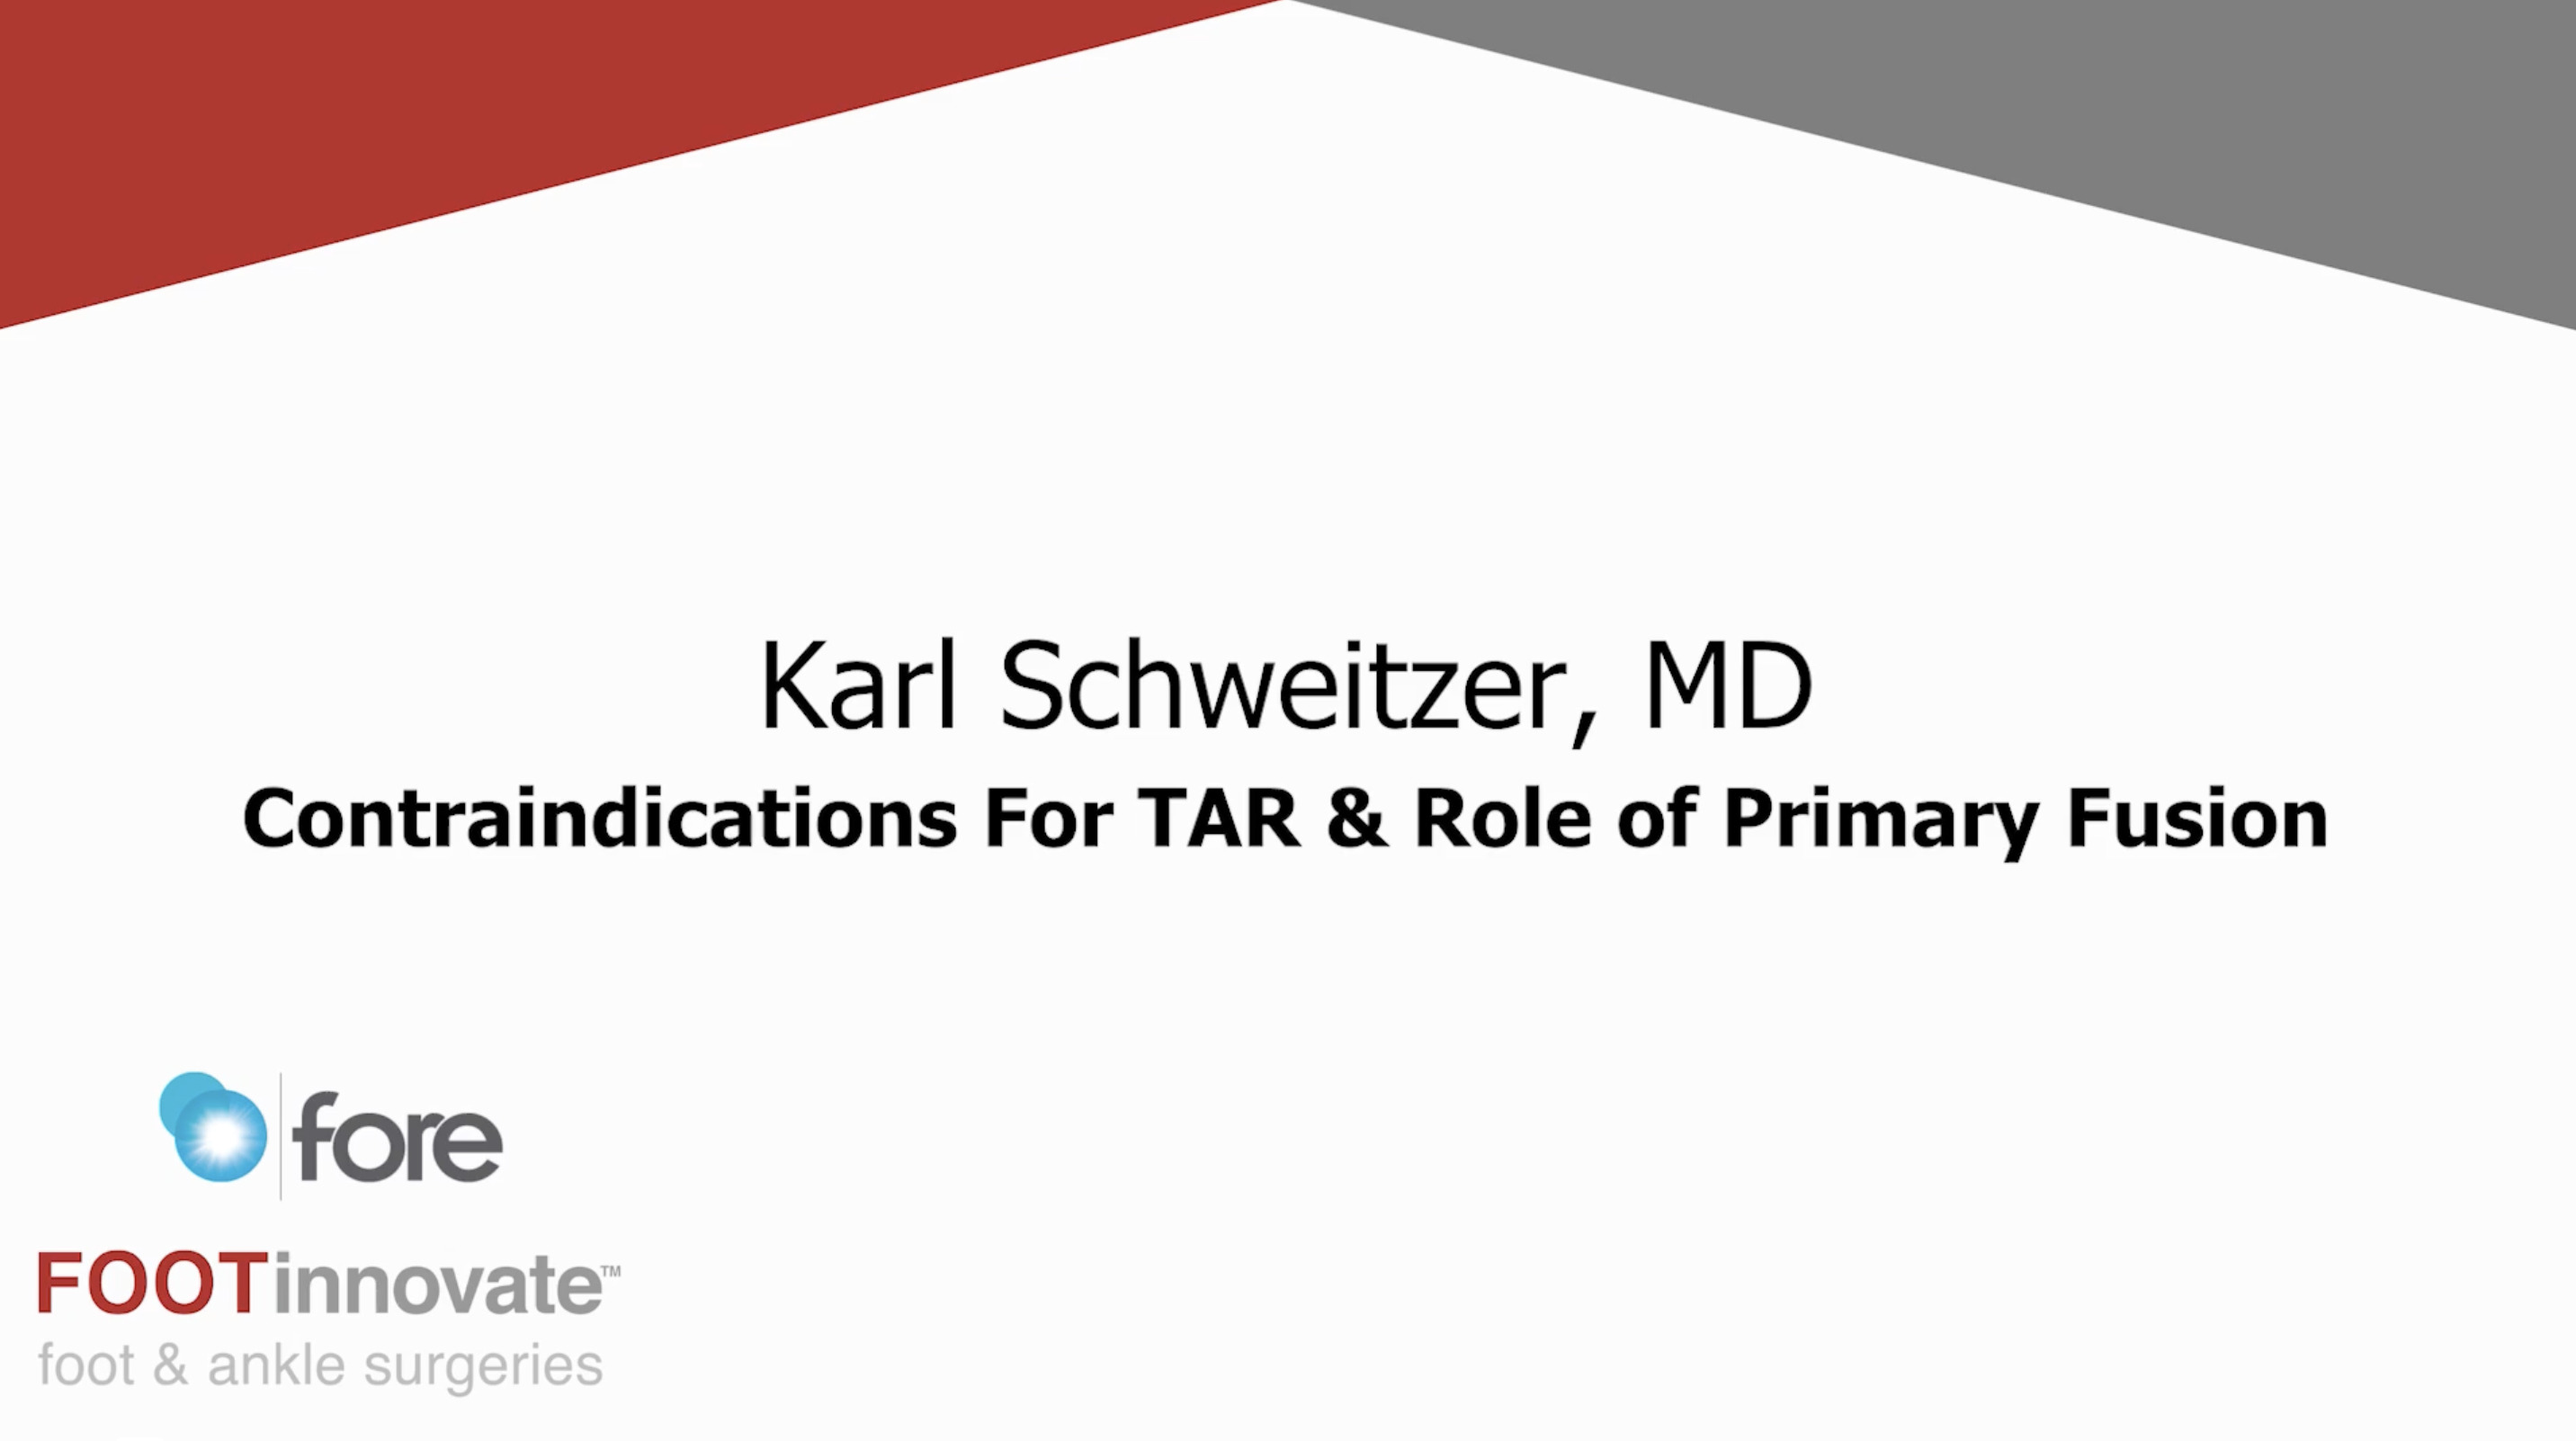 FORE TAR Summit: Contraindications For TAR & Role of Primary Fusion